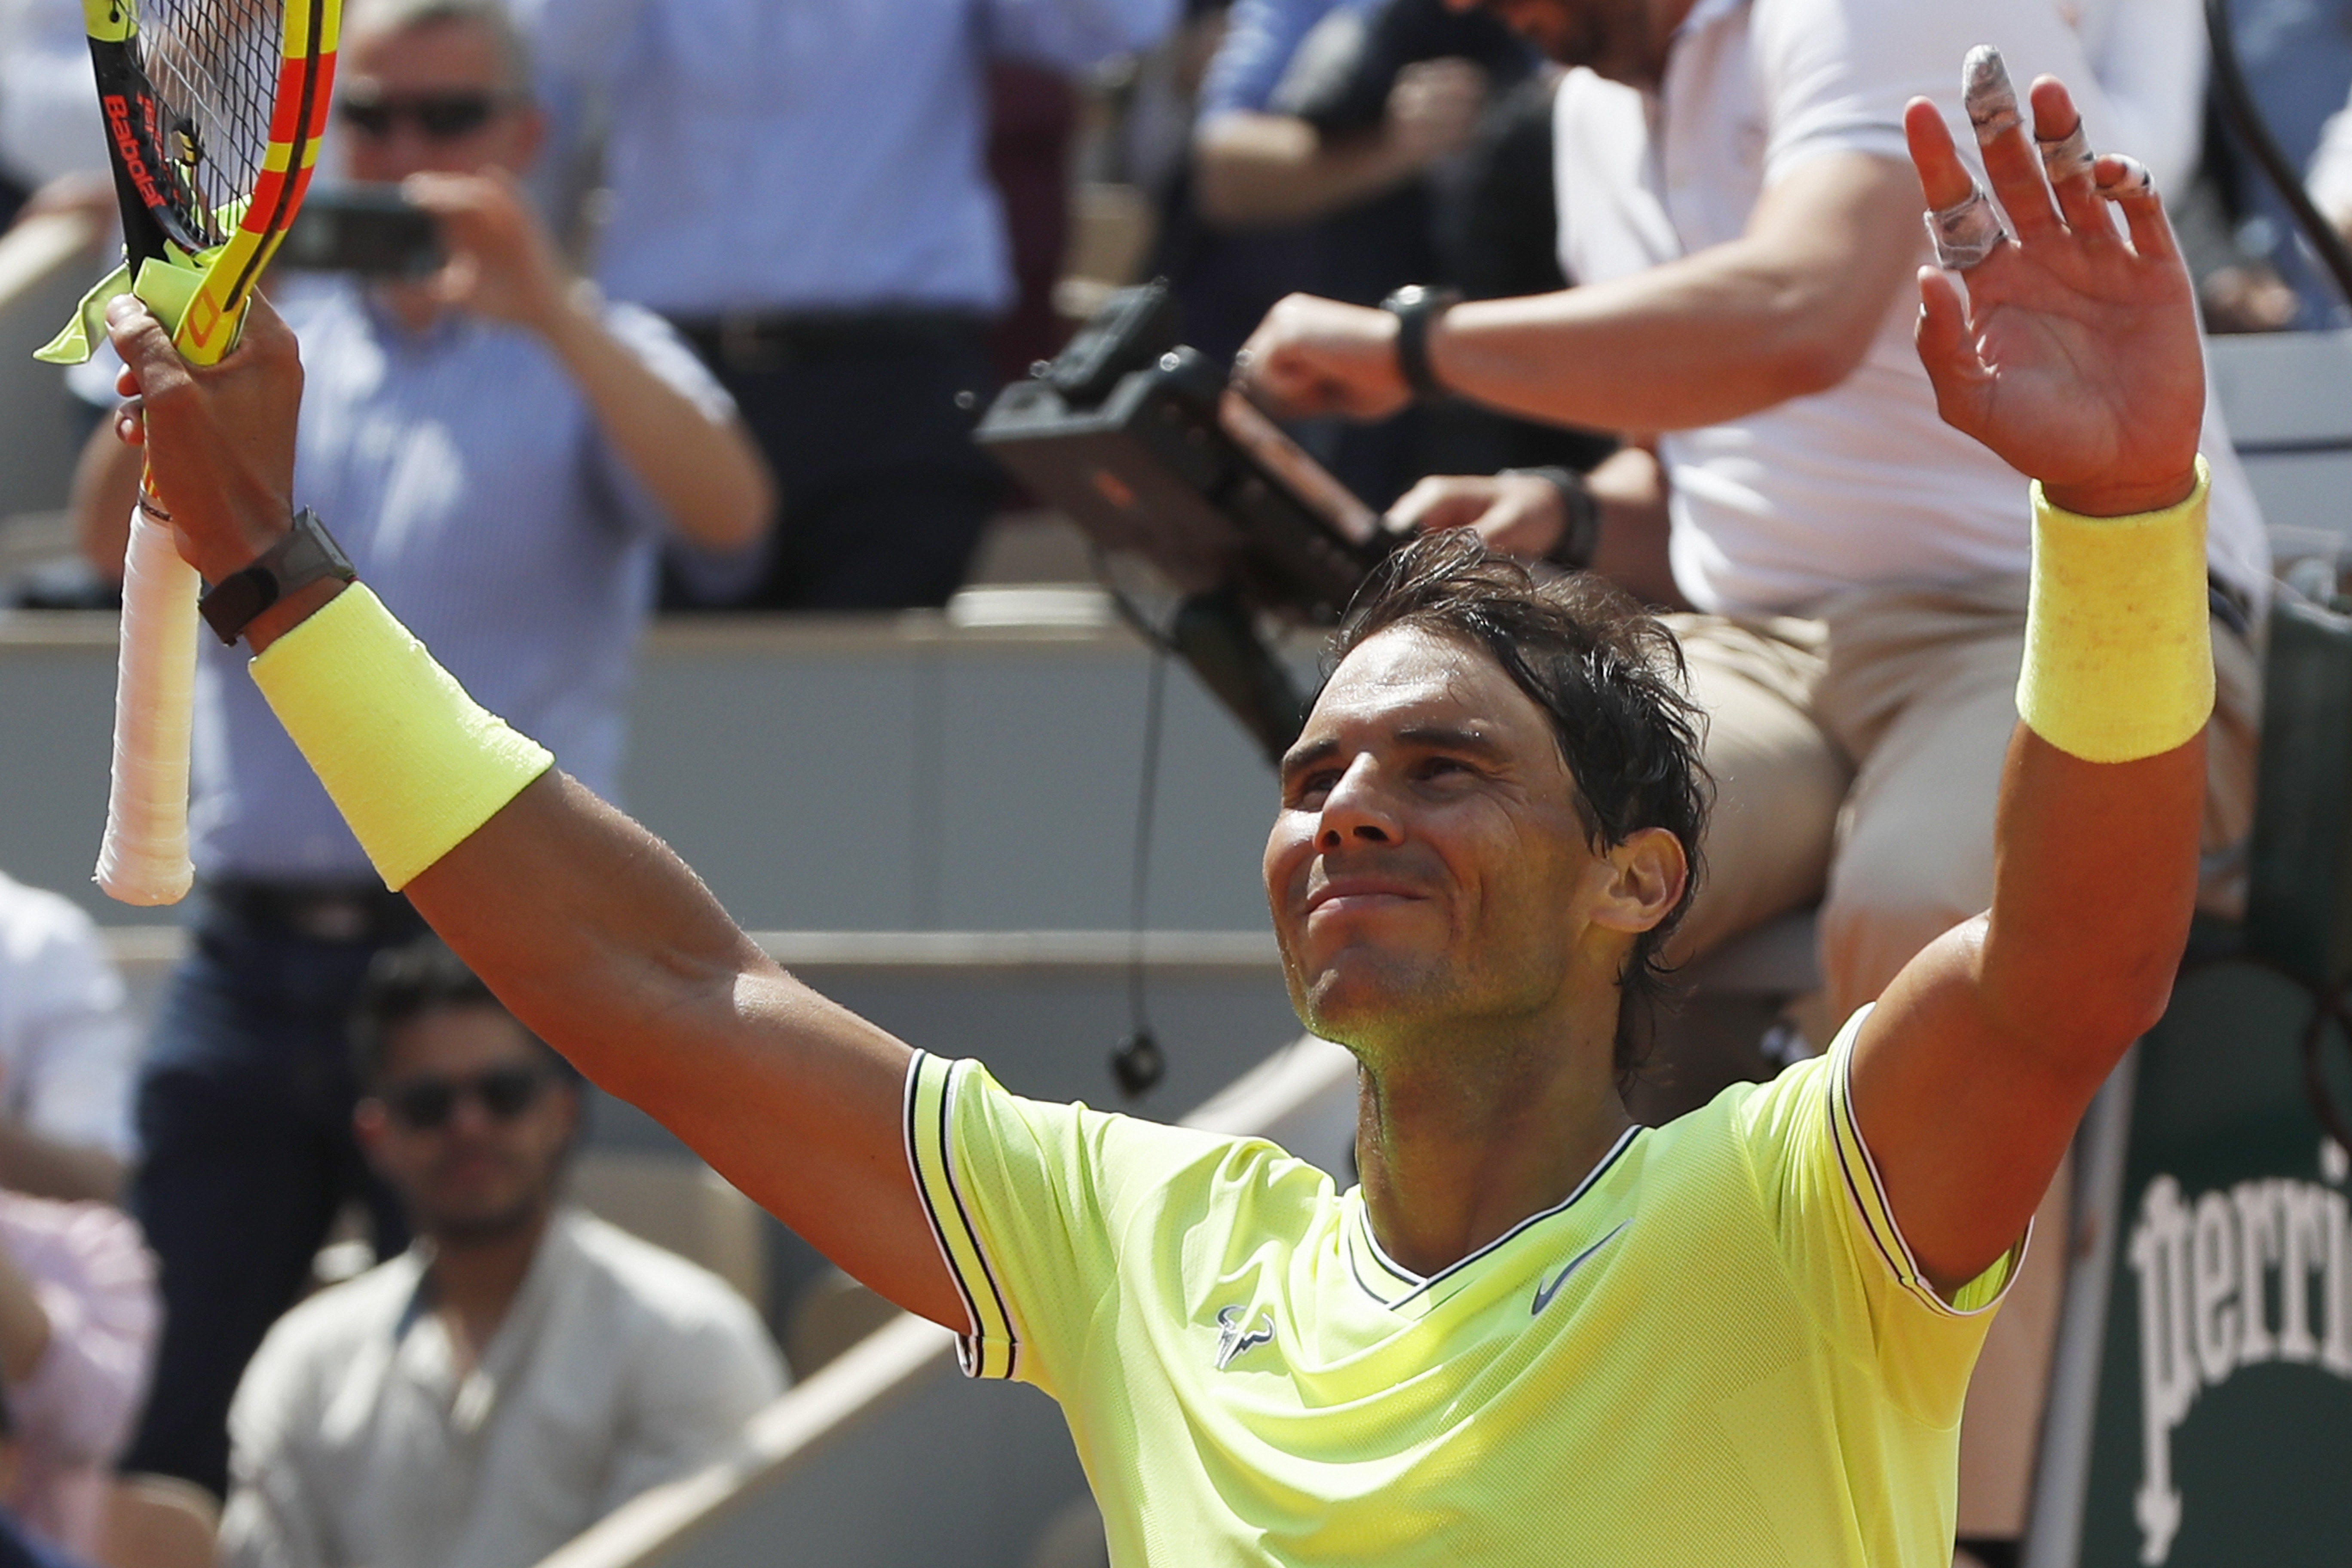 Spain's Rafael Nadal celebrates winning against Germany's Yannick Hanfmann in three sets 6-2, 6-1, 6-3, during their first round match of the French Open tennis tournament at the Roland Garros stadium in Paris - PTI